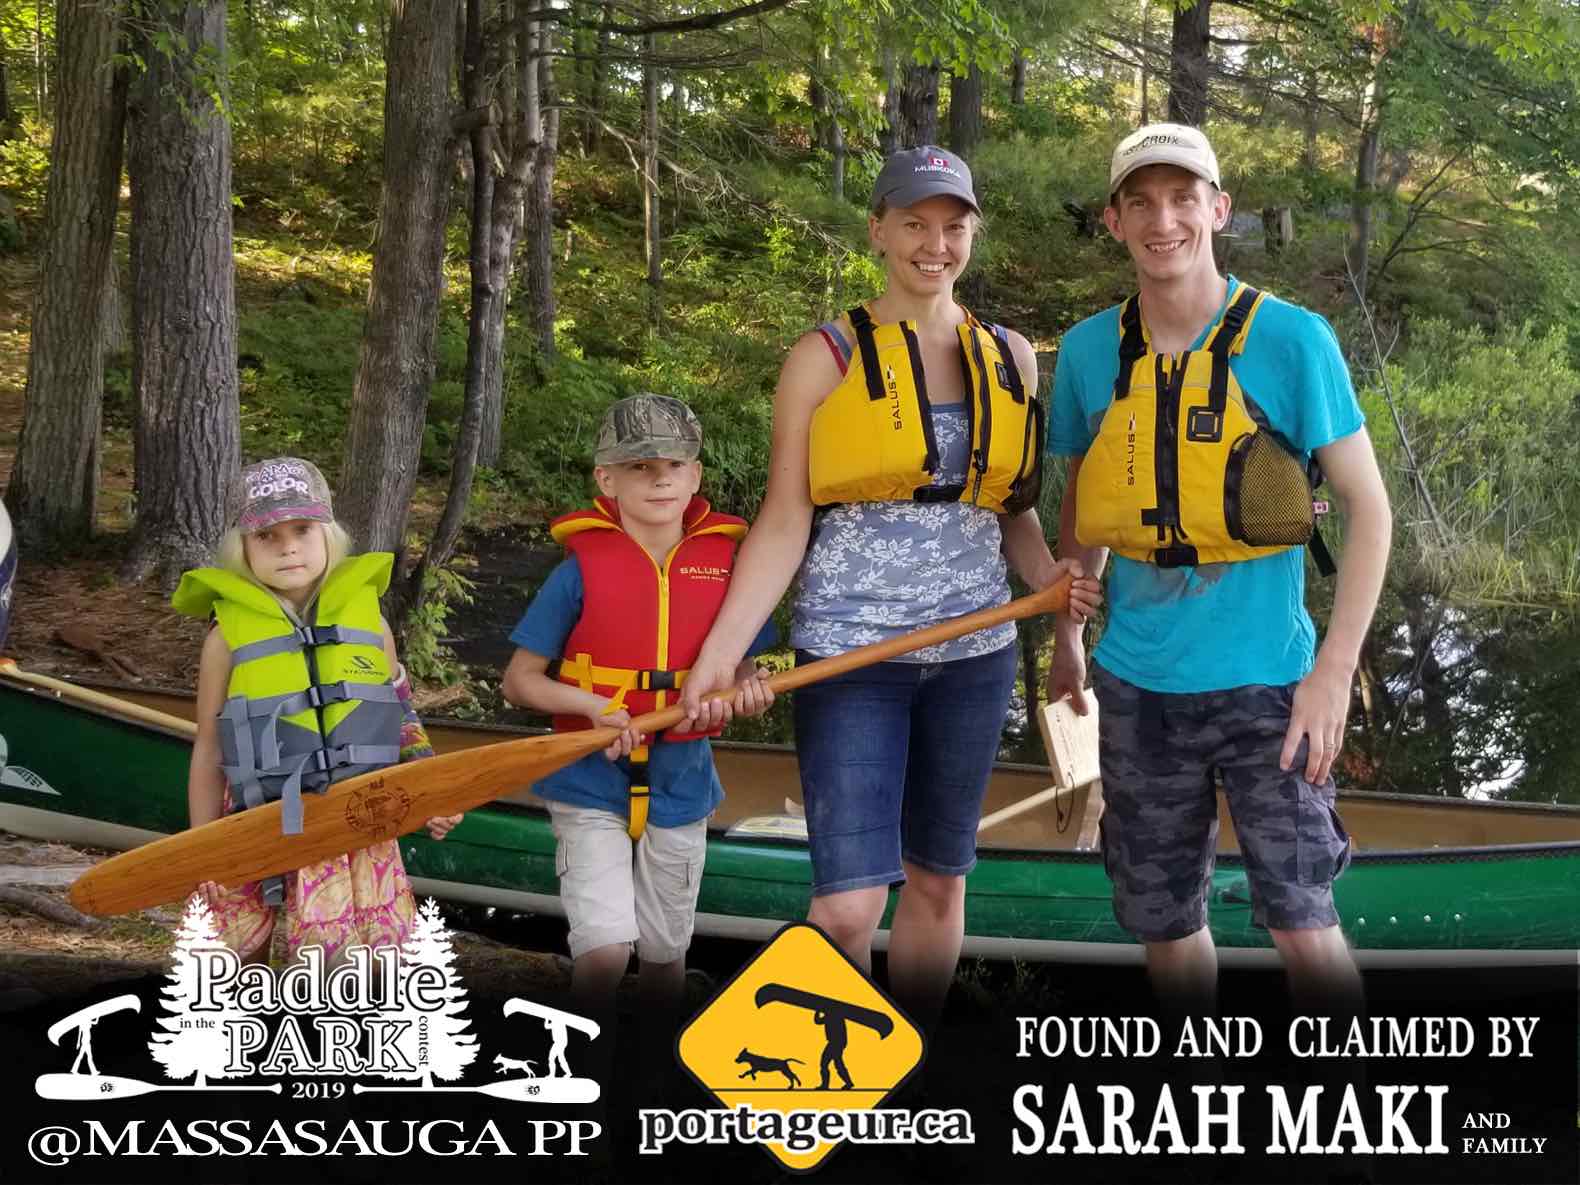 Sarah Maki and her family shown after finding and officially claiming the 2019 portageur.ca paddle - at a campsite in Massasauga Provincial Park